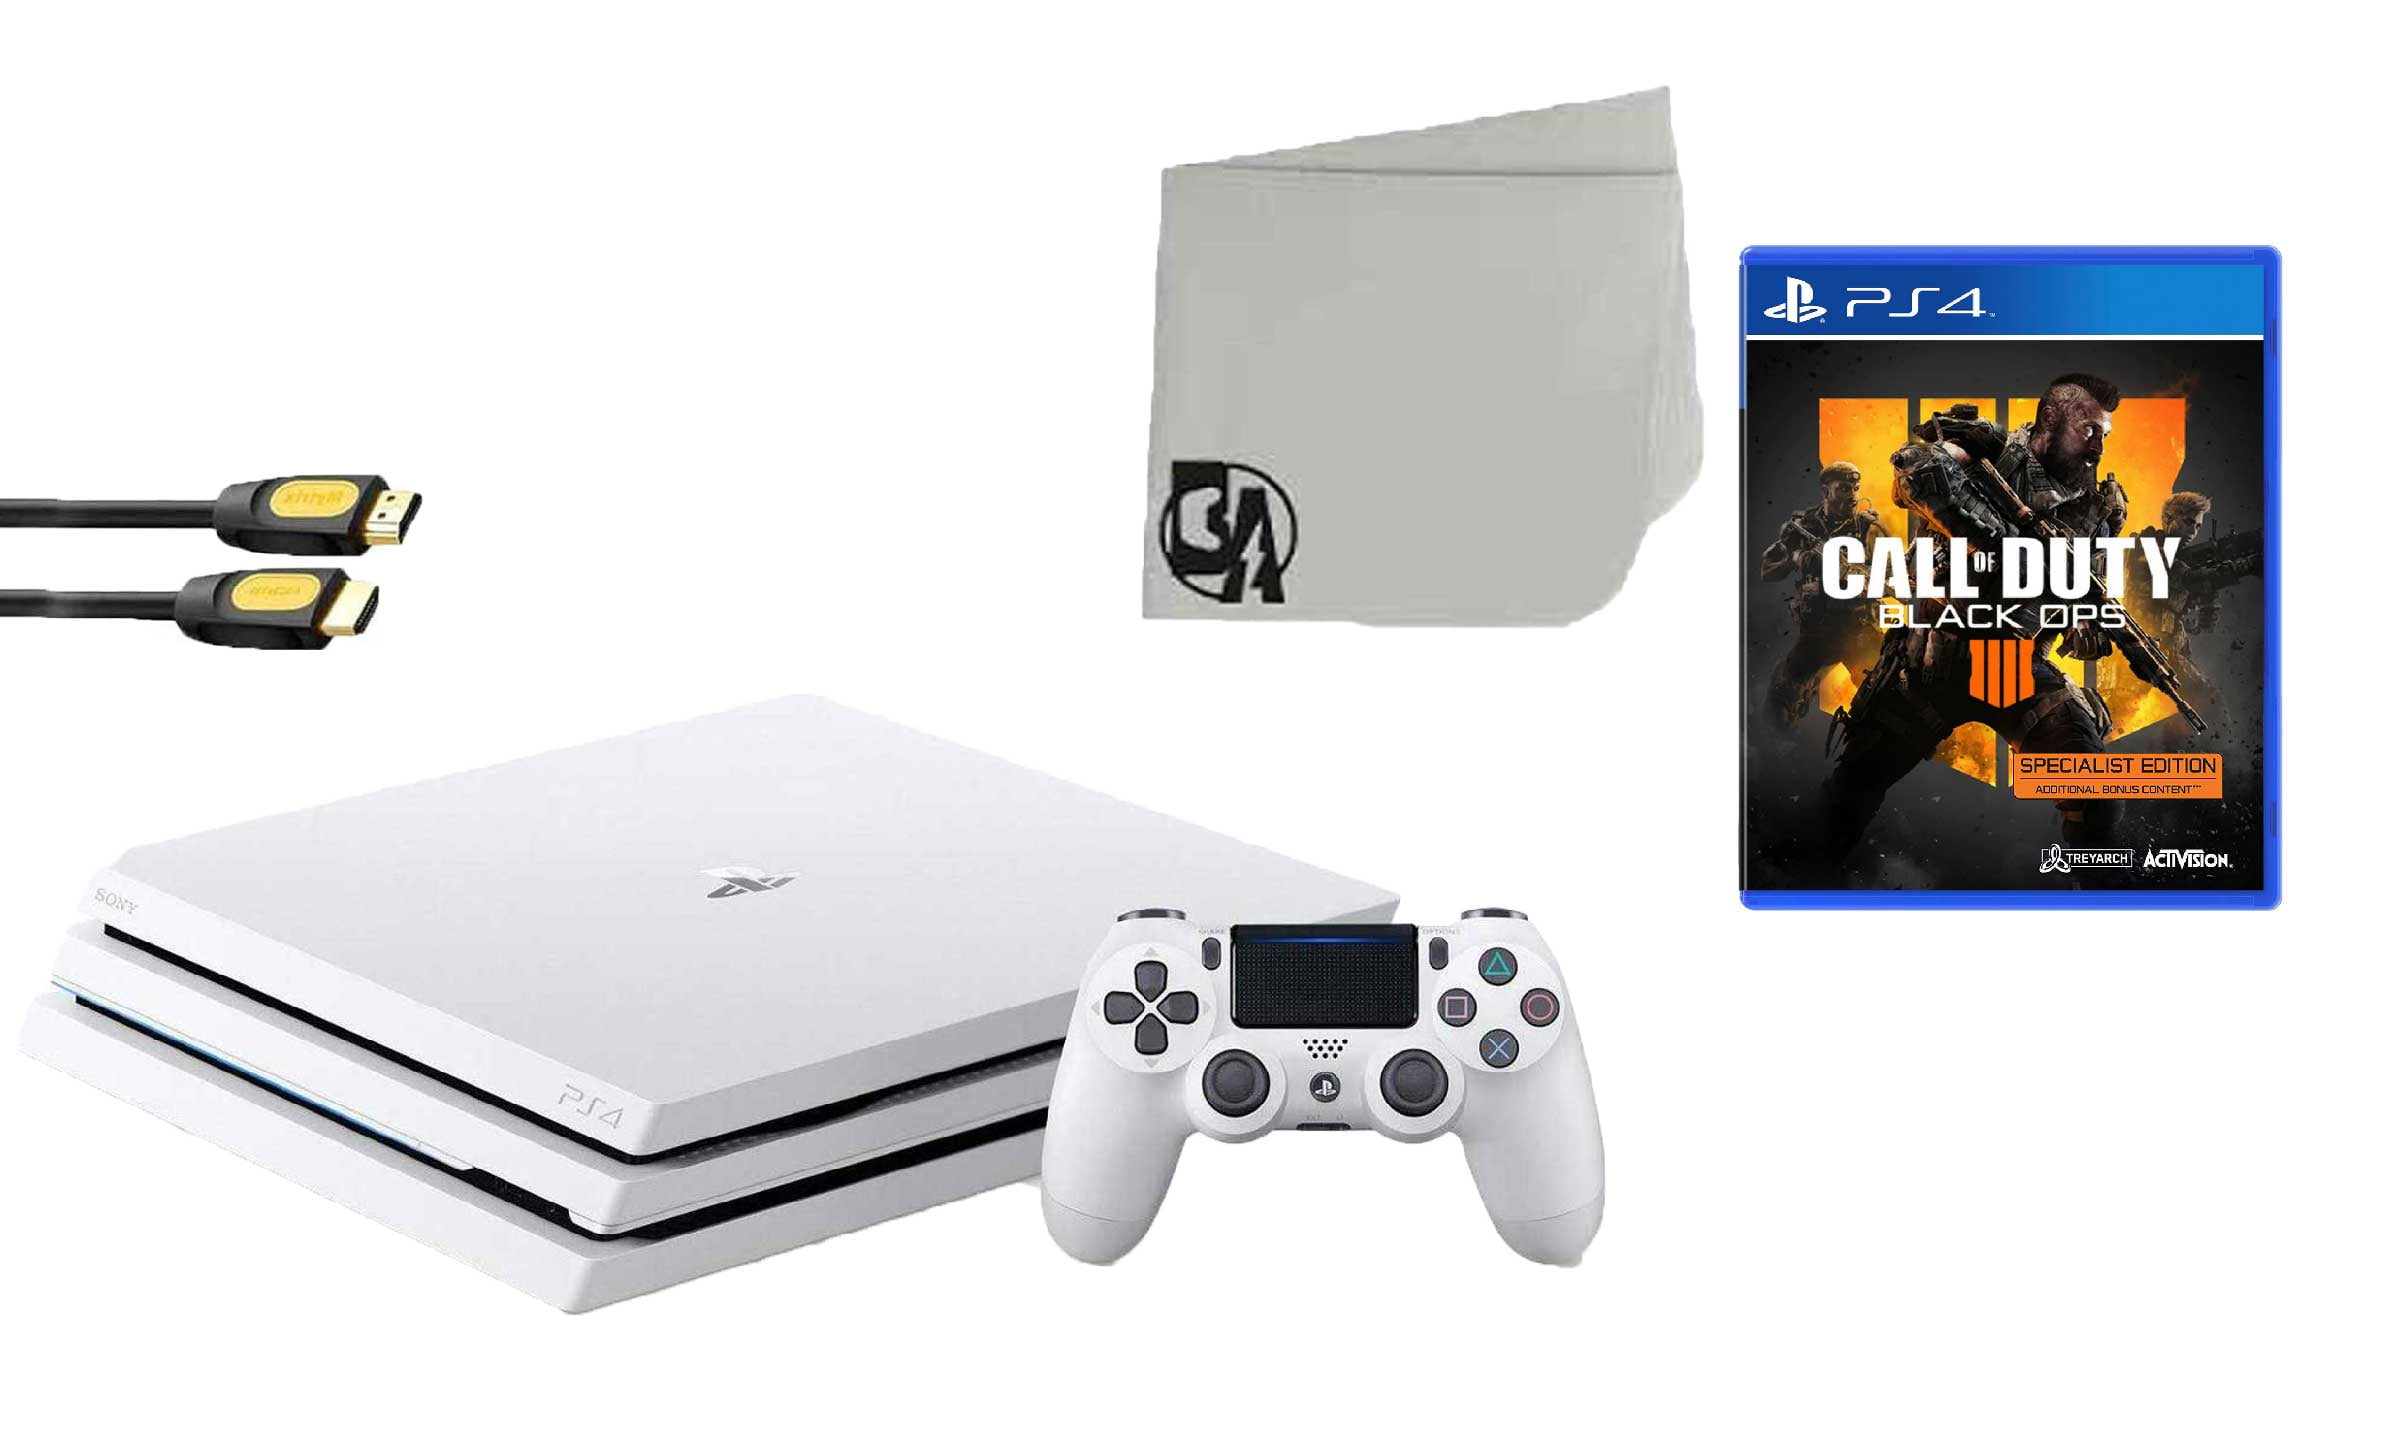 Sony PlayStation PRO Glacier 1TB Gaming Console White with Call of Duty Infinite Warfare BOLT AXTION Bundle Used - Walmart.com